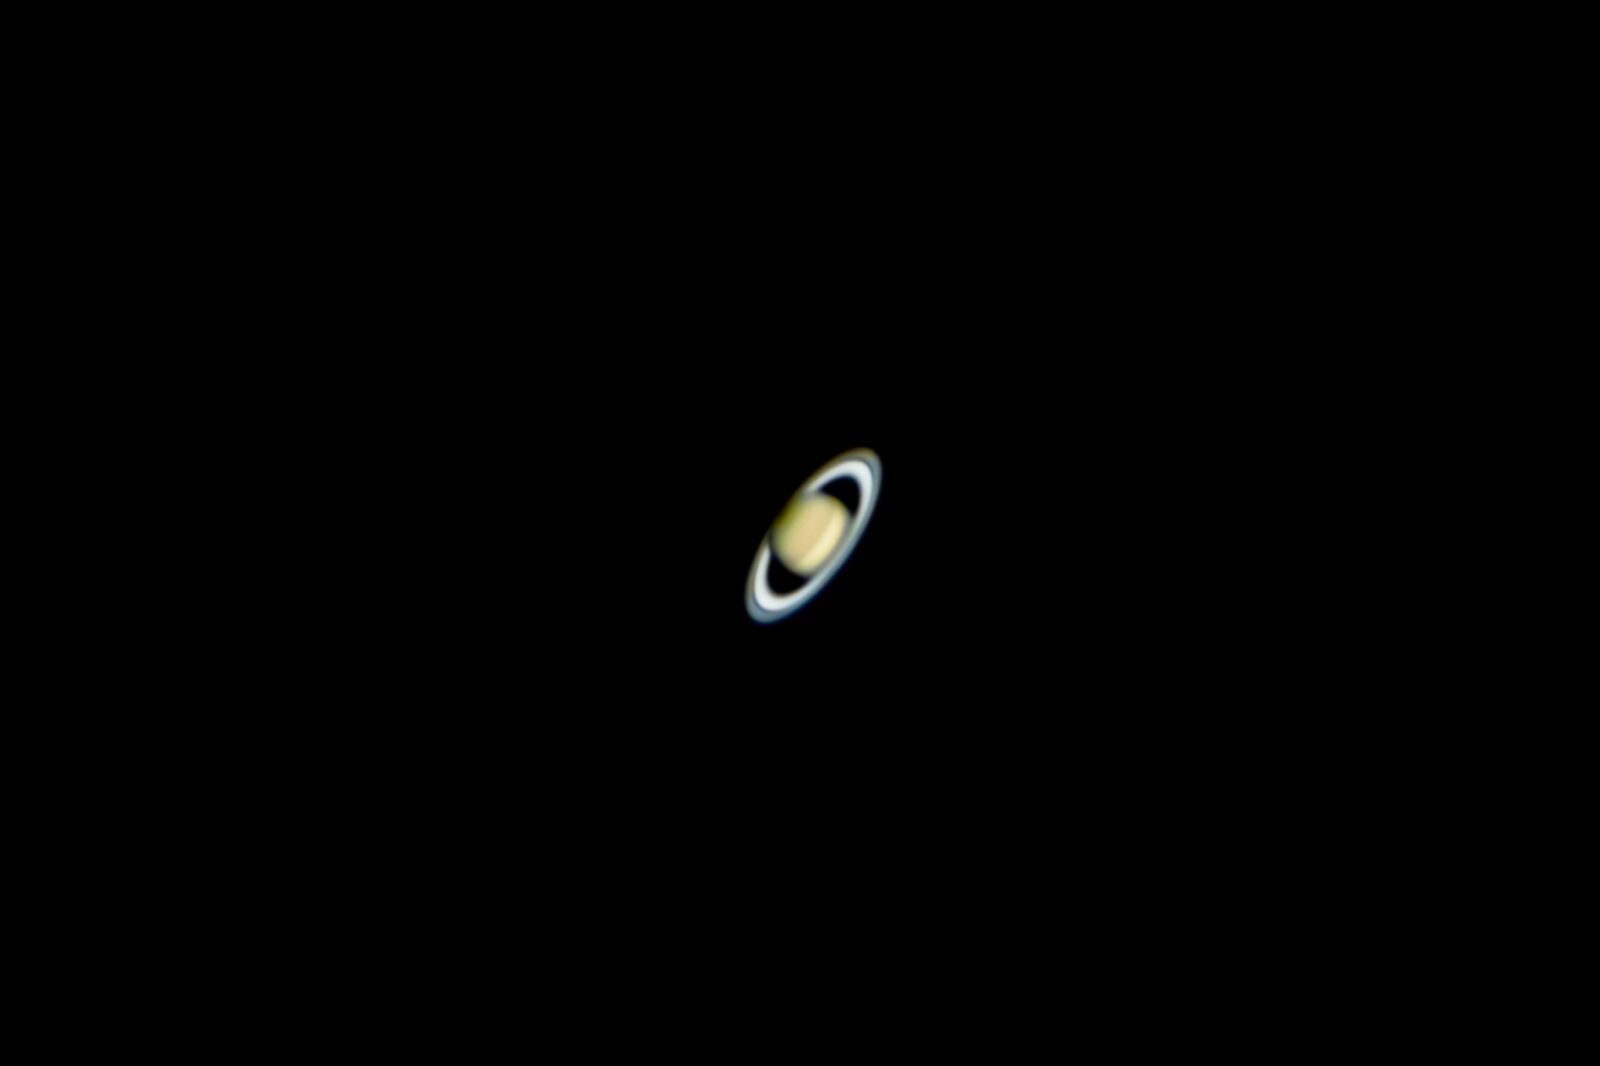 Planet Saturn and its rings as seen from an advanced amateur telescope